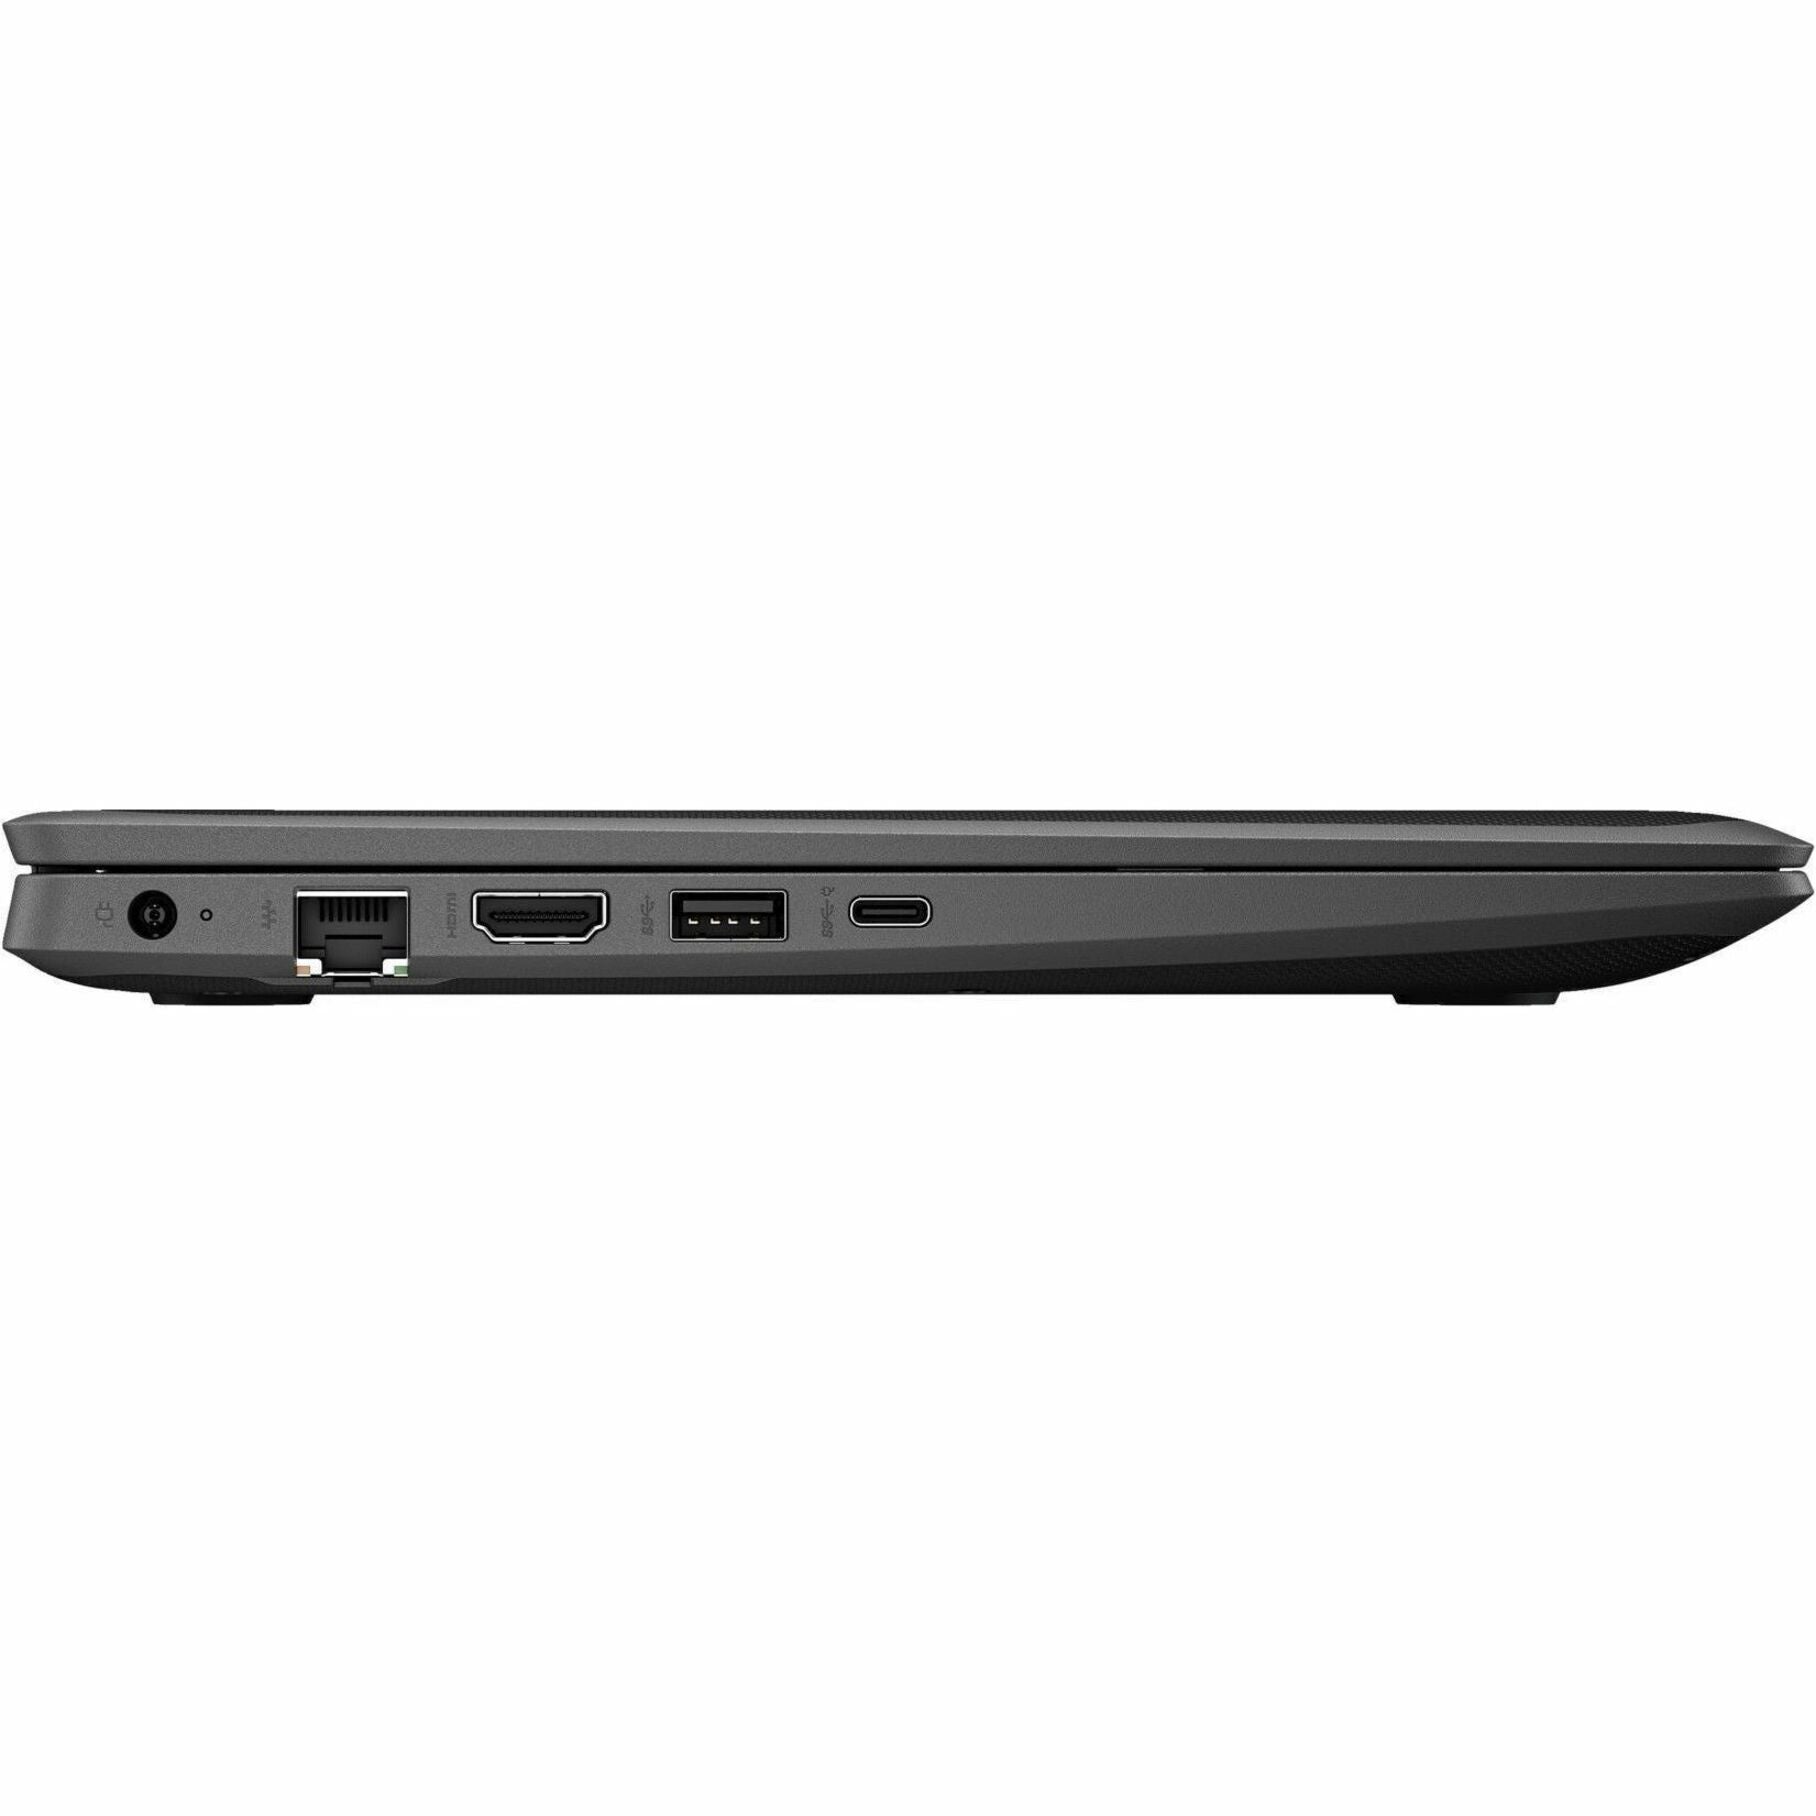 HP Pro x360 Fortis G11 11.6" Touchscreen Rugged Convertible 2 in 1 Notebook - HD - 1366 x 768 - Intel N-Series N200 Quad-core (4 Core) 1 GHz - 8 GB Total RAM - 8 GB On-board Memory - 256 GB SSD - Jack Black (9E8T5UT#ABA)